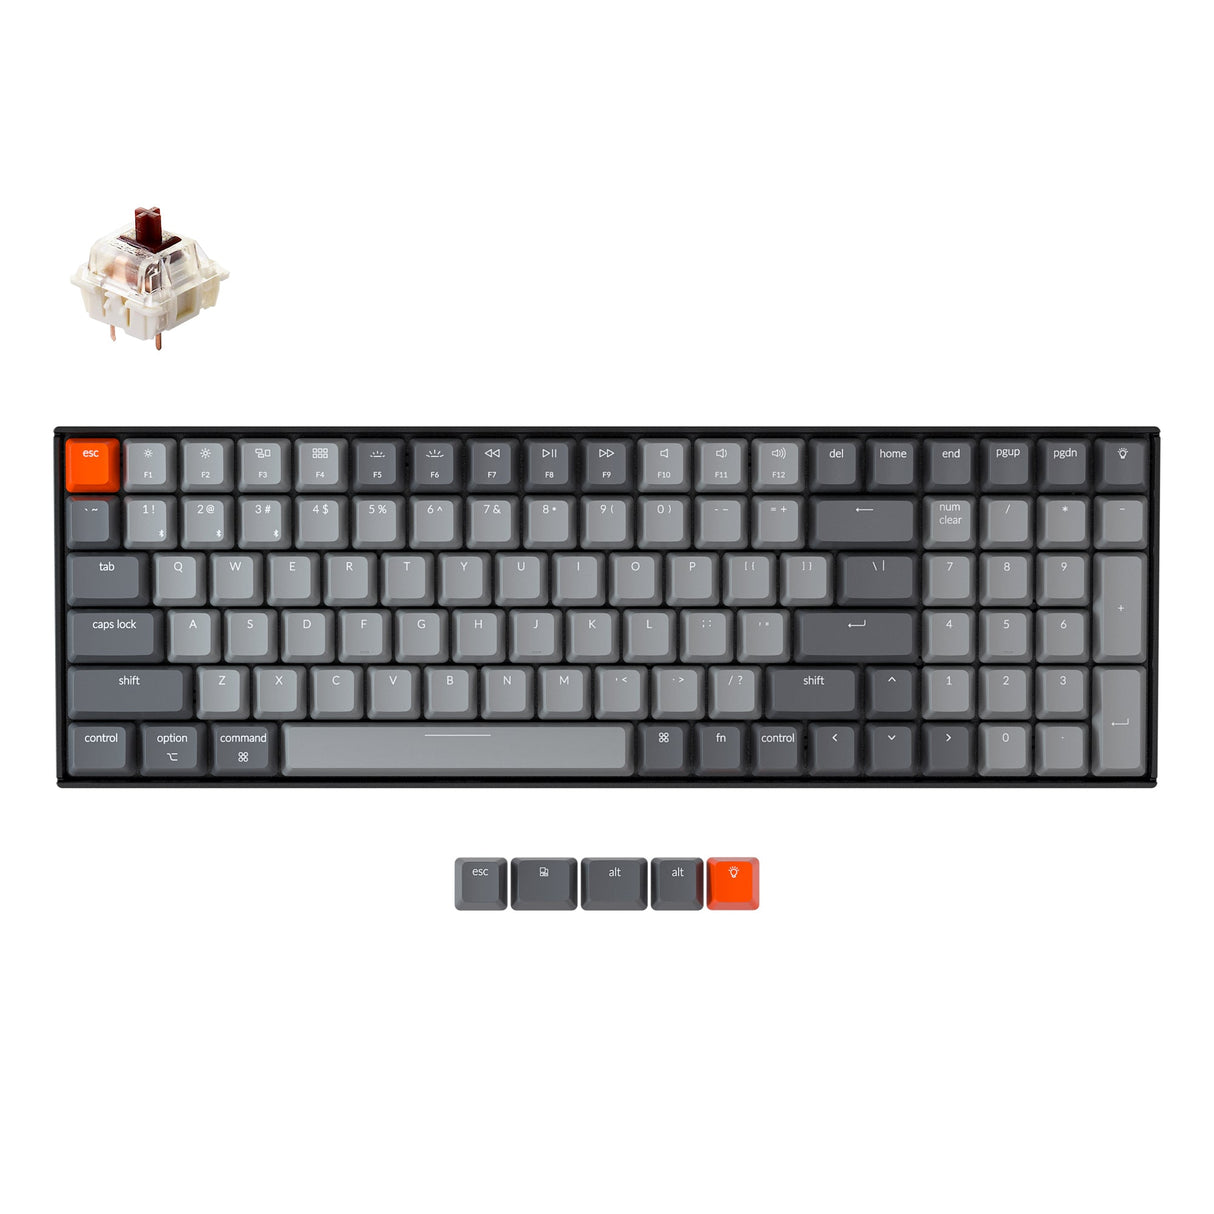 Keychron K4 Version 2 Hot-swappable Wireless Mechanical Keyboard, 100-keys layout for Mac Windows iOS with Gateron brown switch with type-C RGB or white backlight